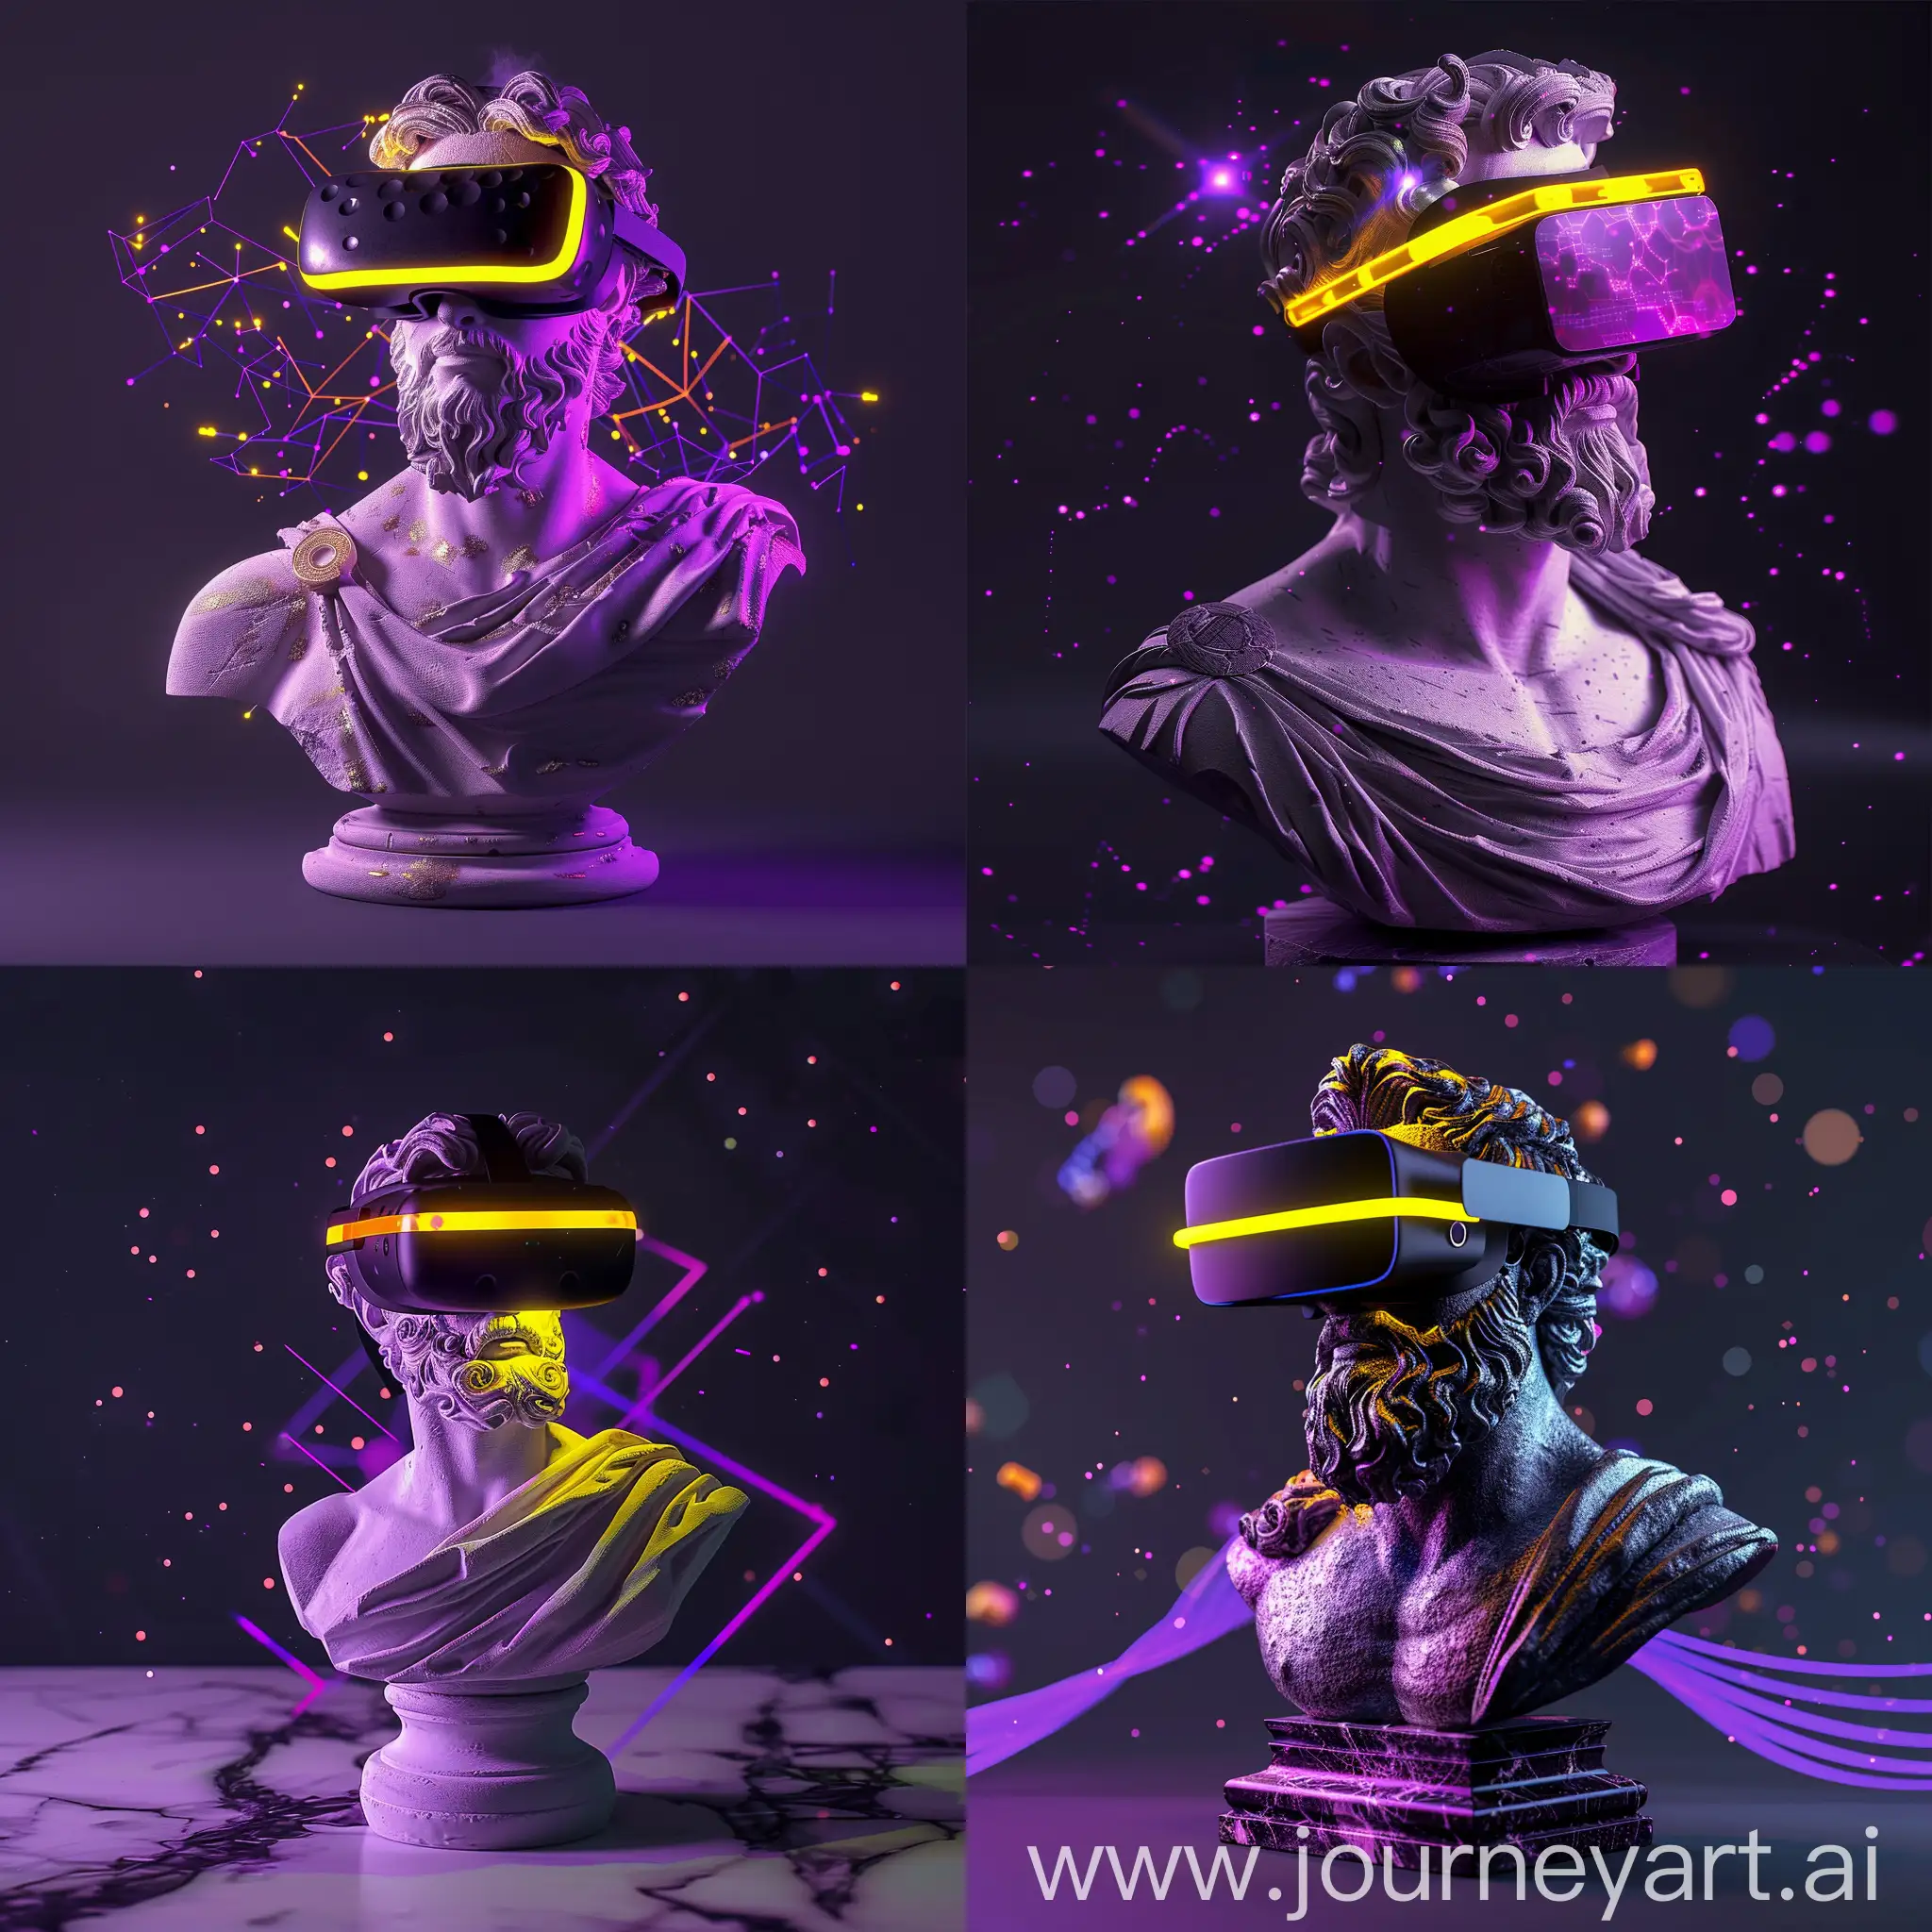 Dreamy-Pose-of-Zeus-Bust-Sculpture-with-VR-Glasses-and-Purple-Light-Reflections